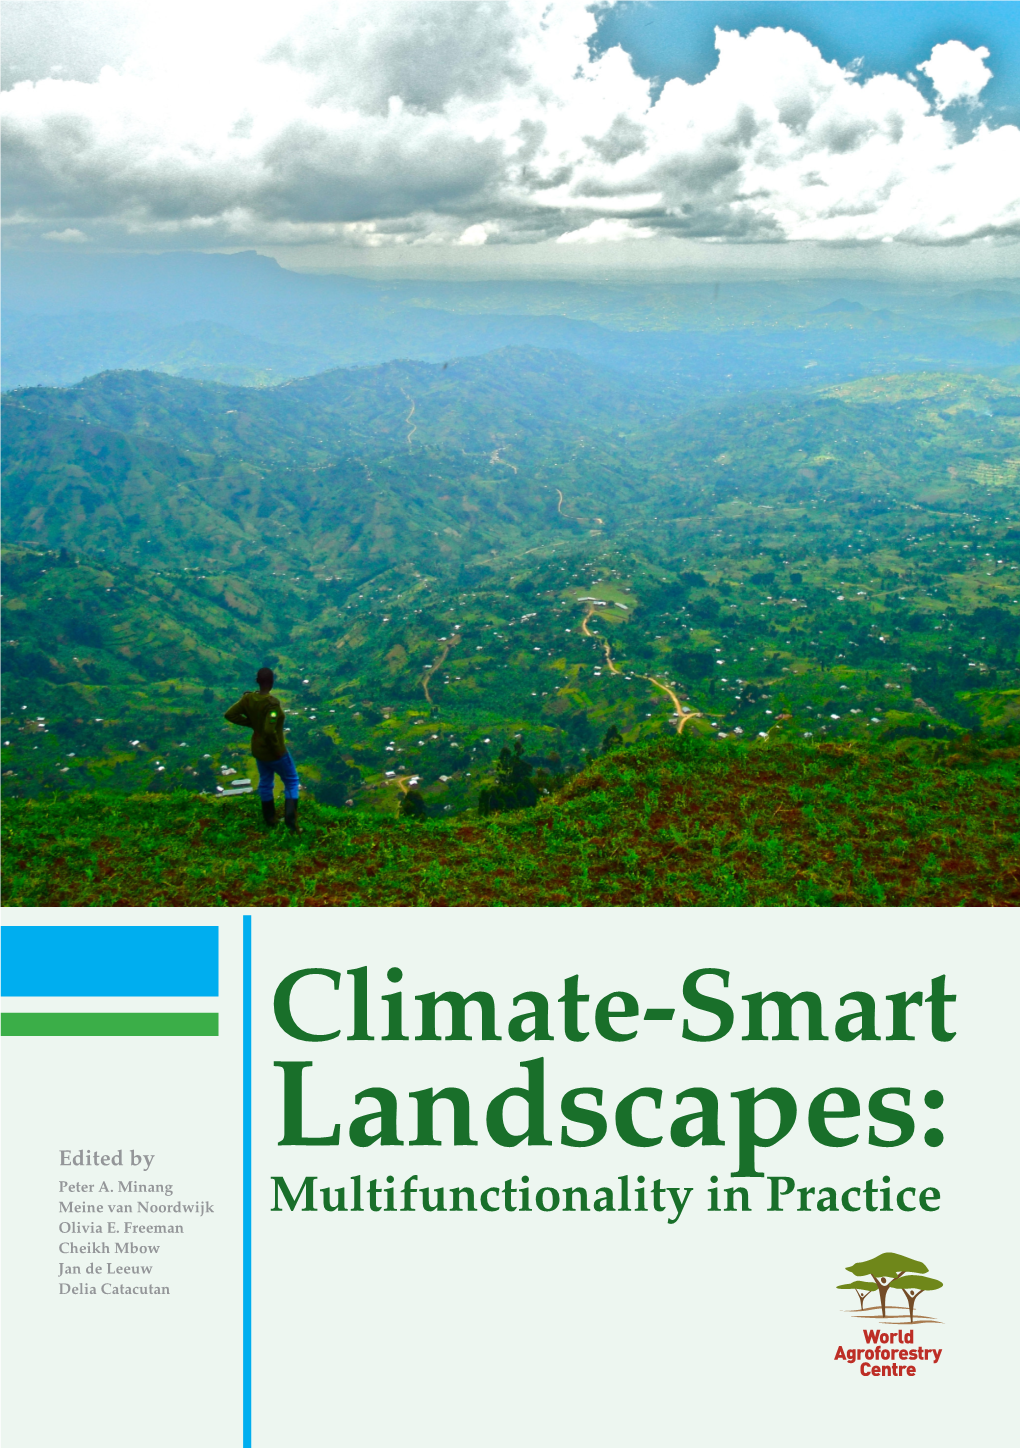 Climate-Smart Landscapes: Multifunctionality in Practice